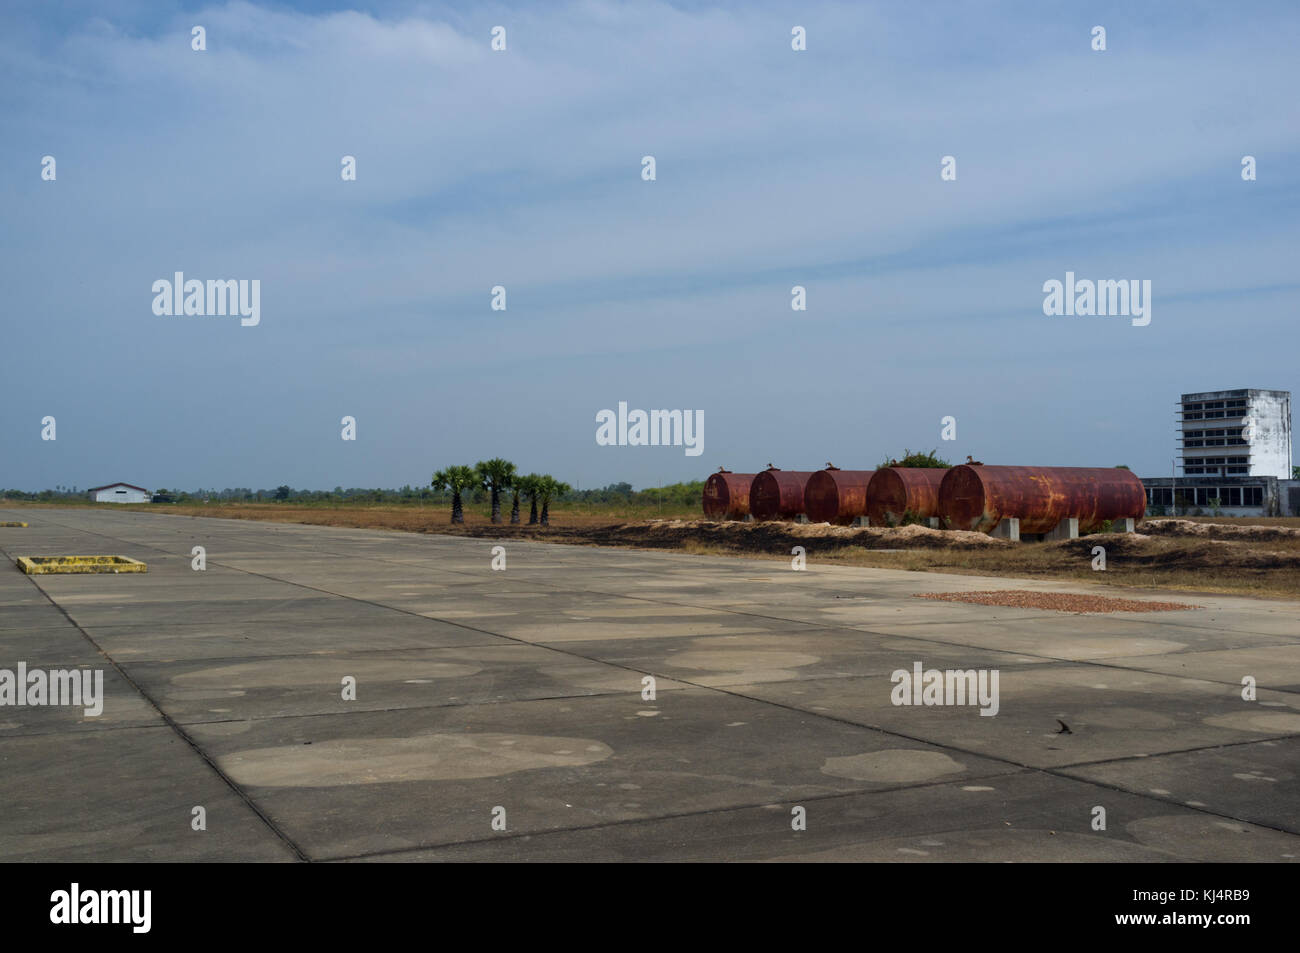 This airport was built by Khmer Rouge near Kampong Chhnang, in Cambodia. This airport has one concrete runway and few buildings. Today only buffalo of Stock Photo